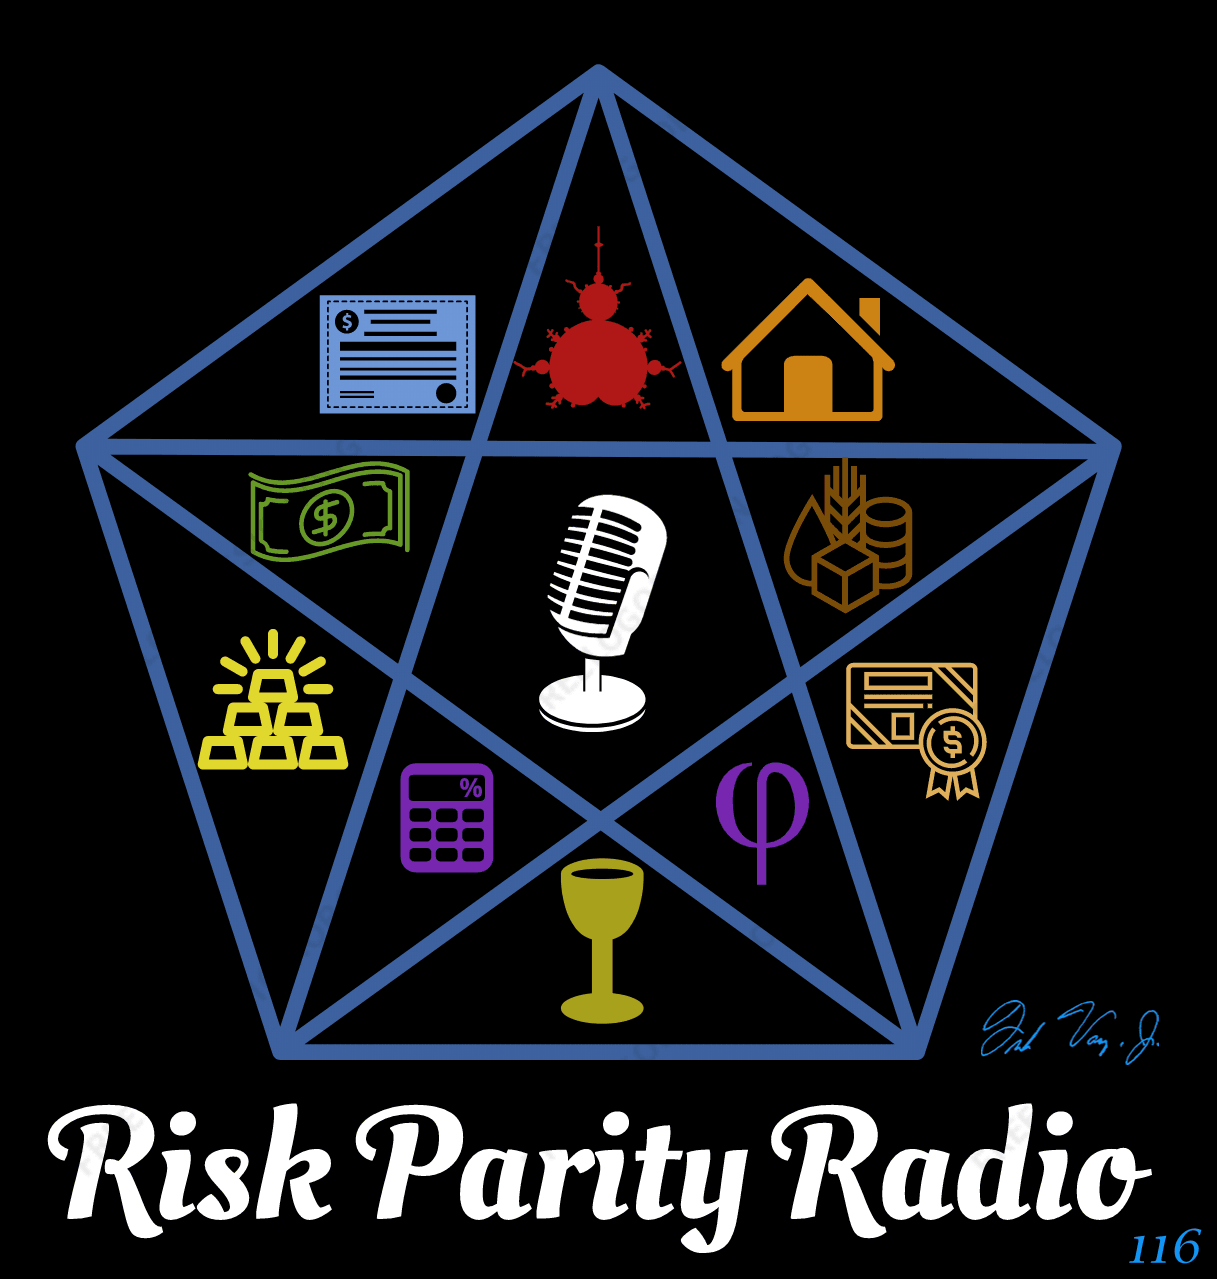 Limited Edition Risk Parity Radio Autographed Print #116